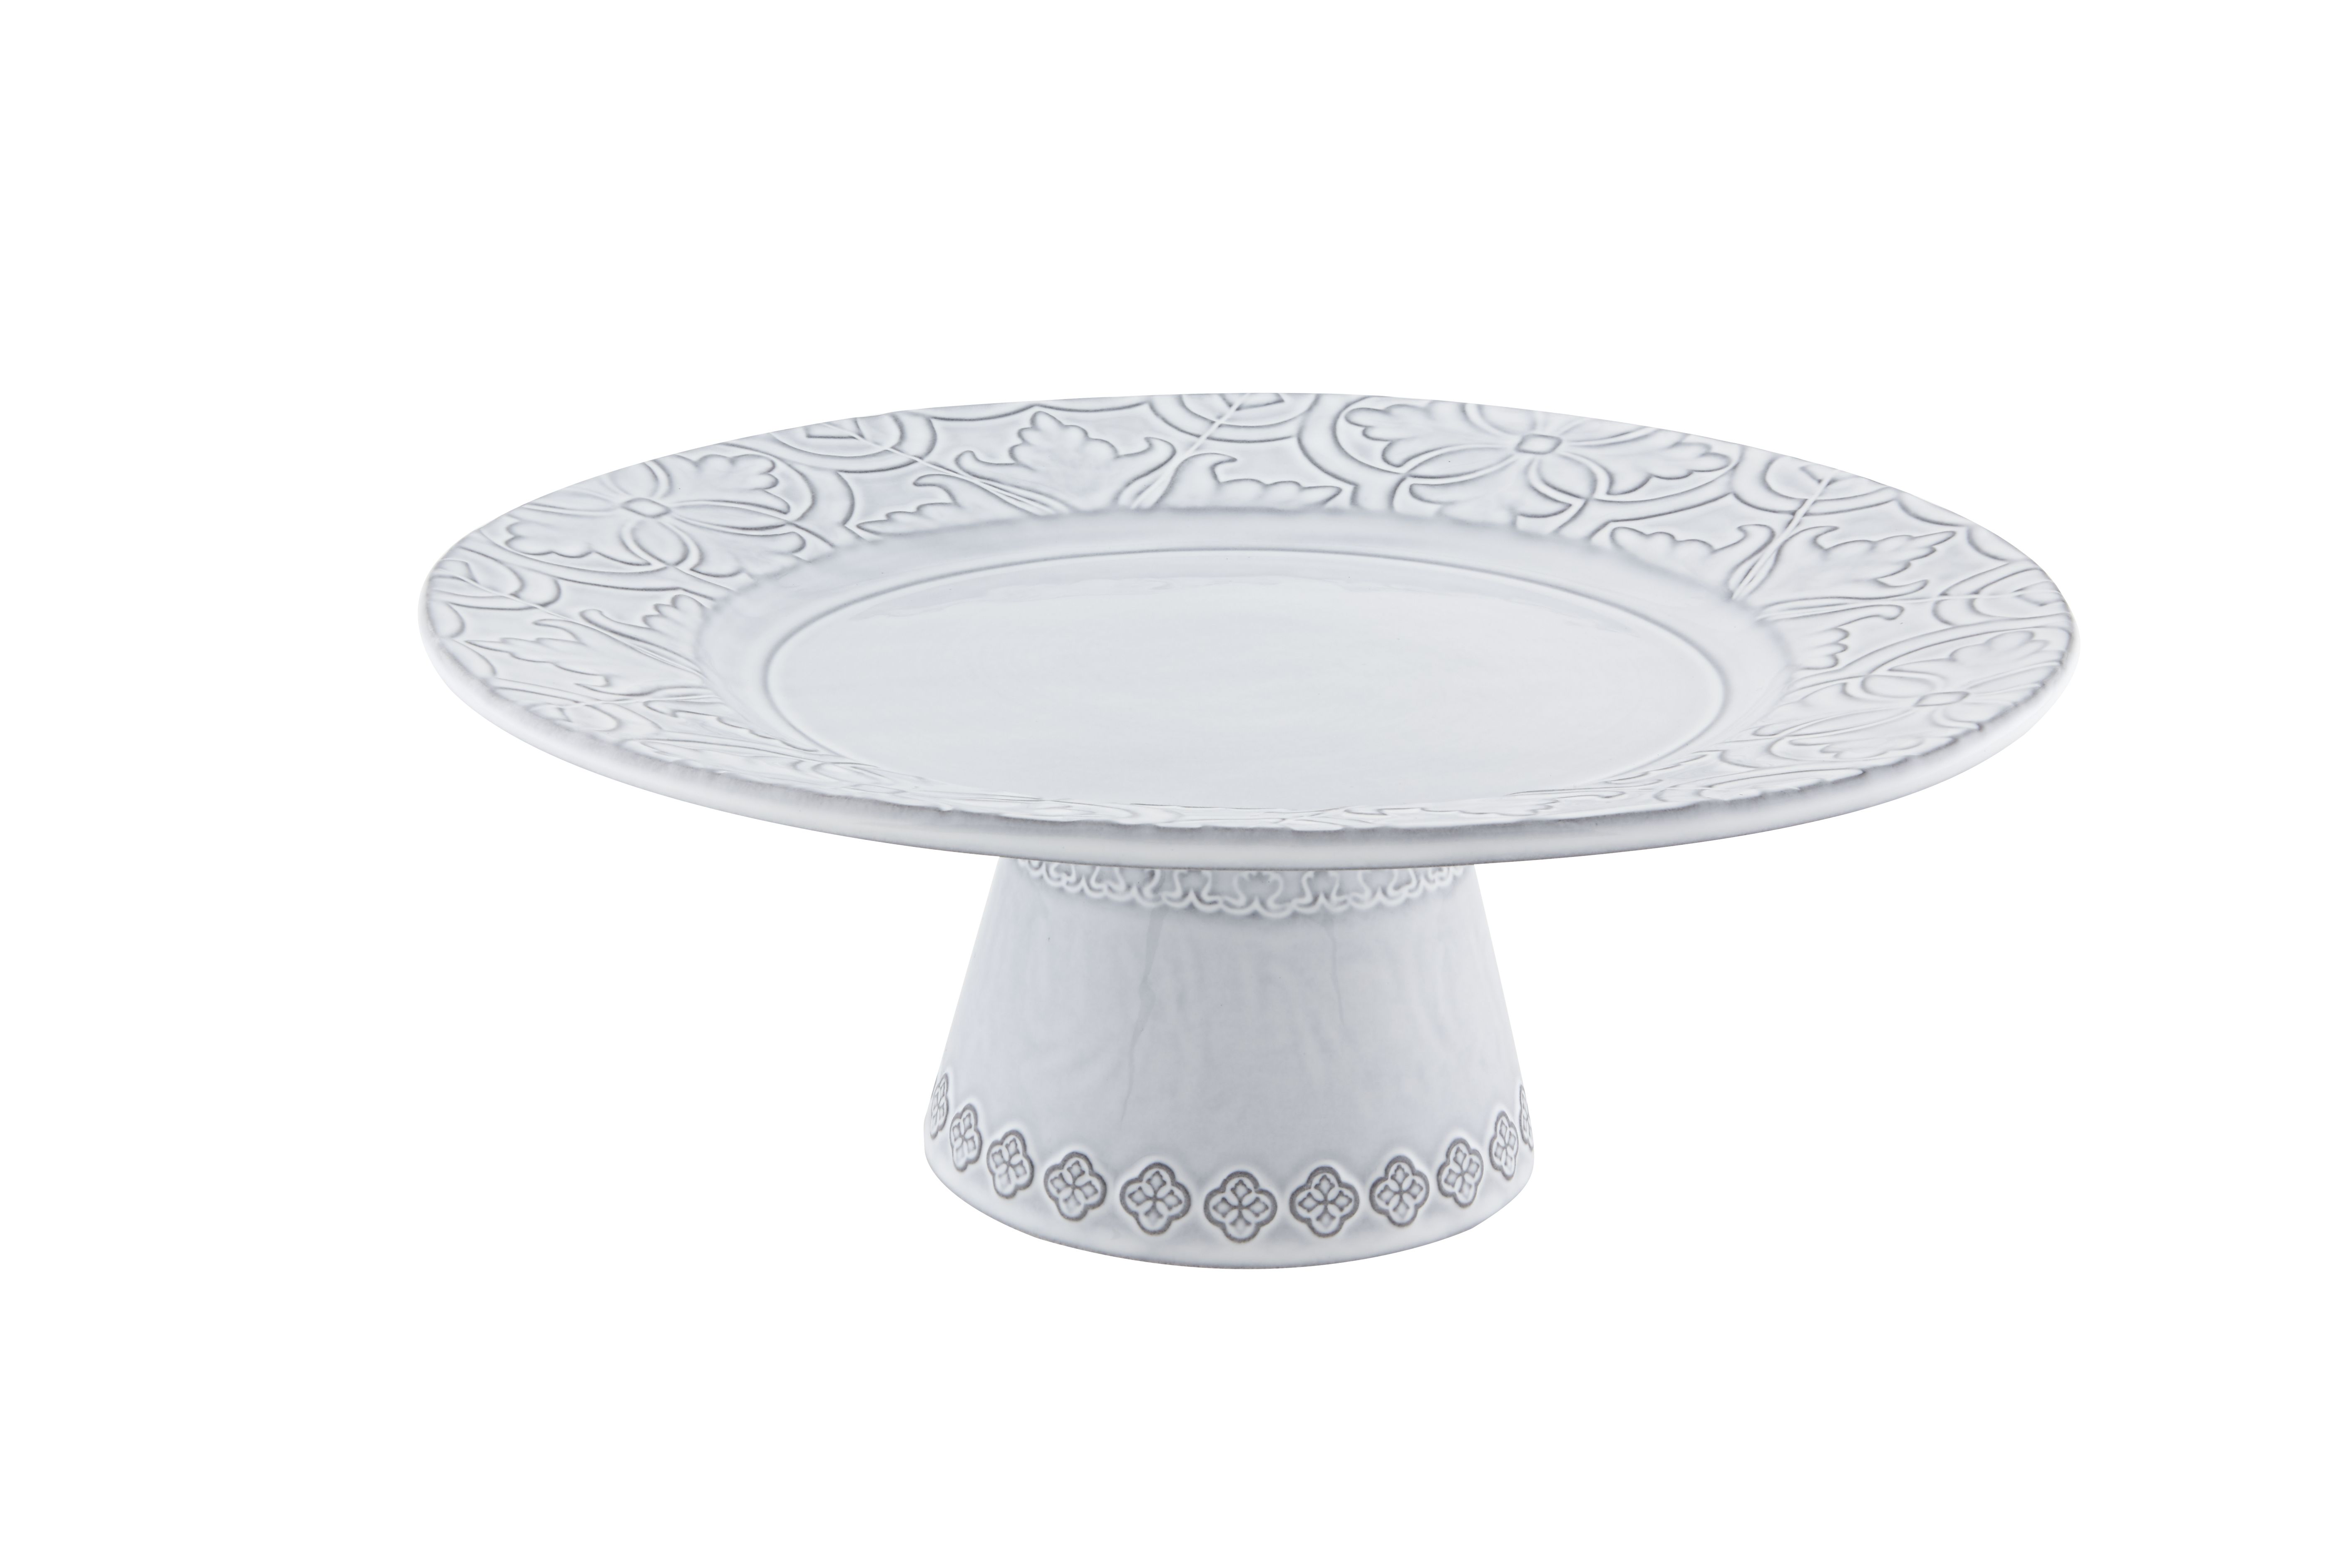 Small Cake Stand